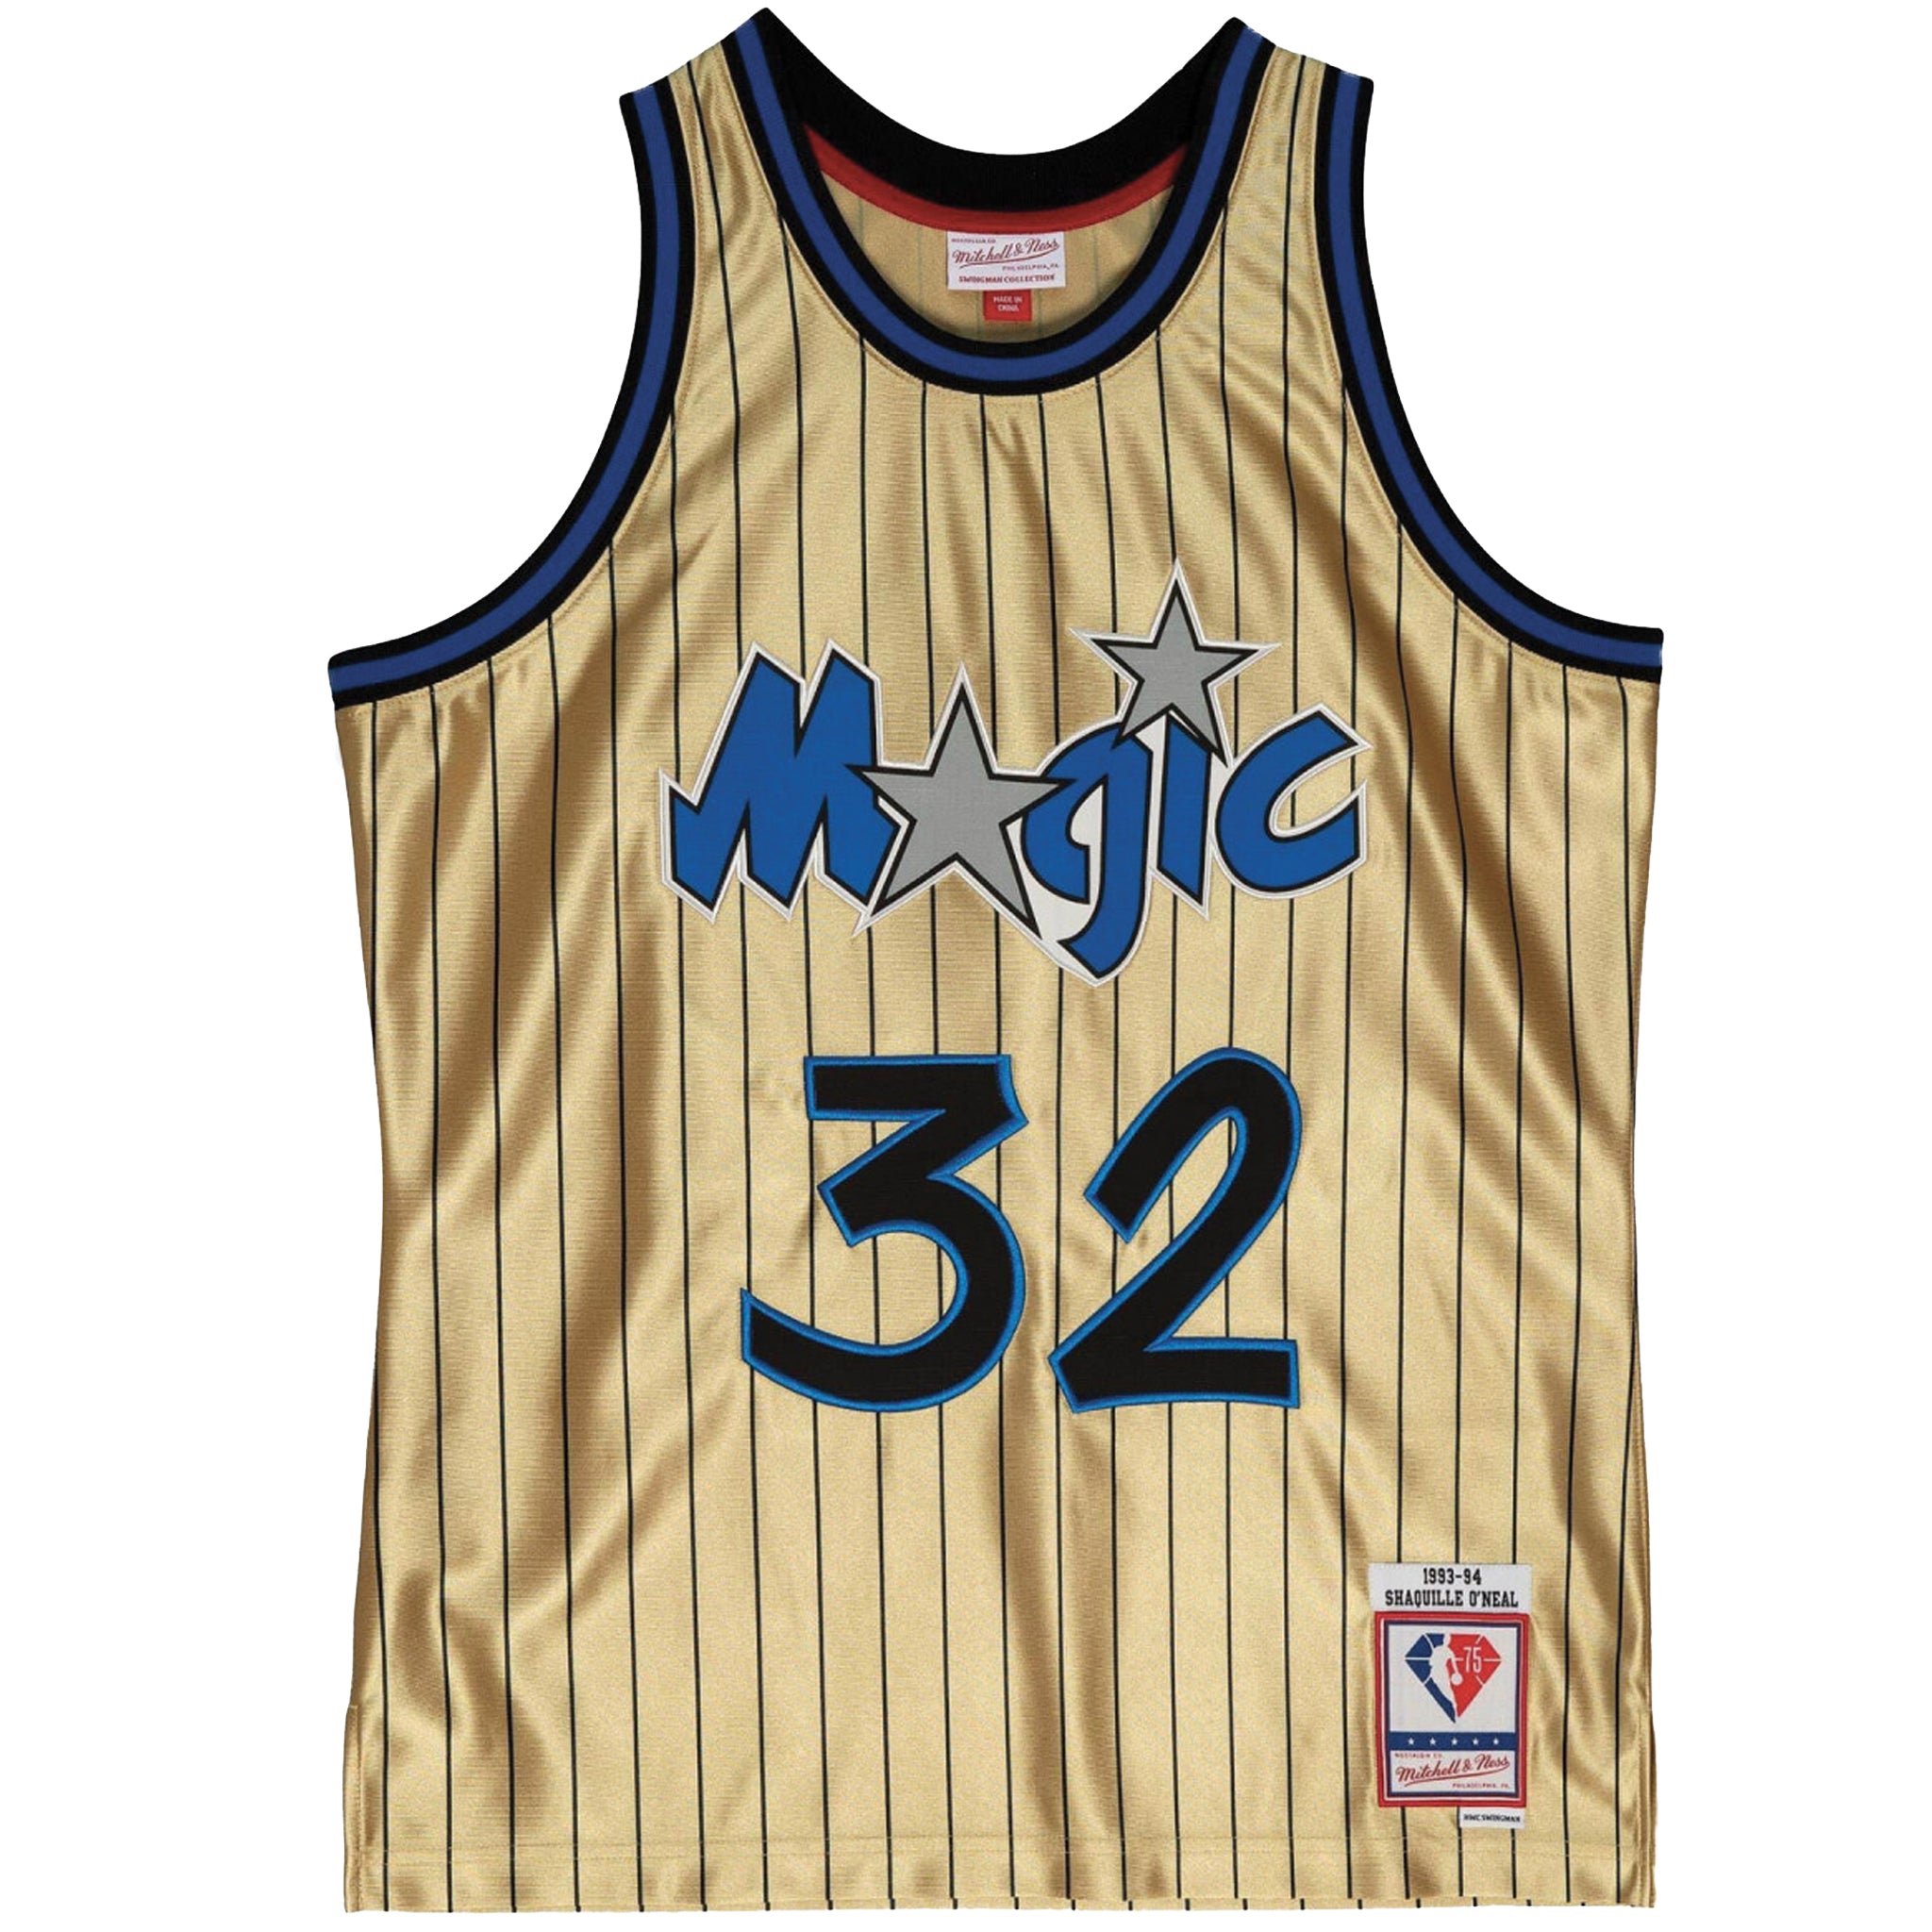 Shaquille O'Neal Apparel, Shaquille O'Neal Orlando Magic Jerseys